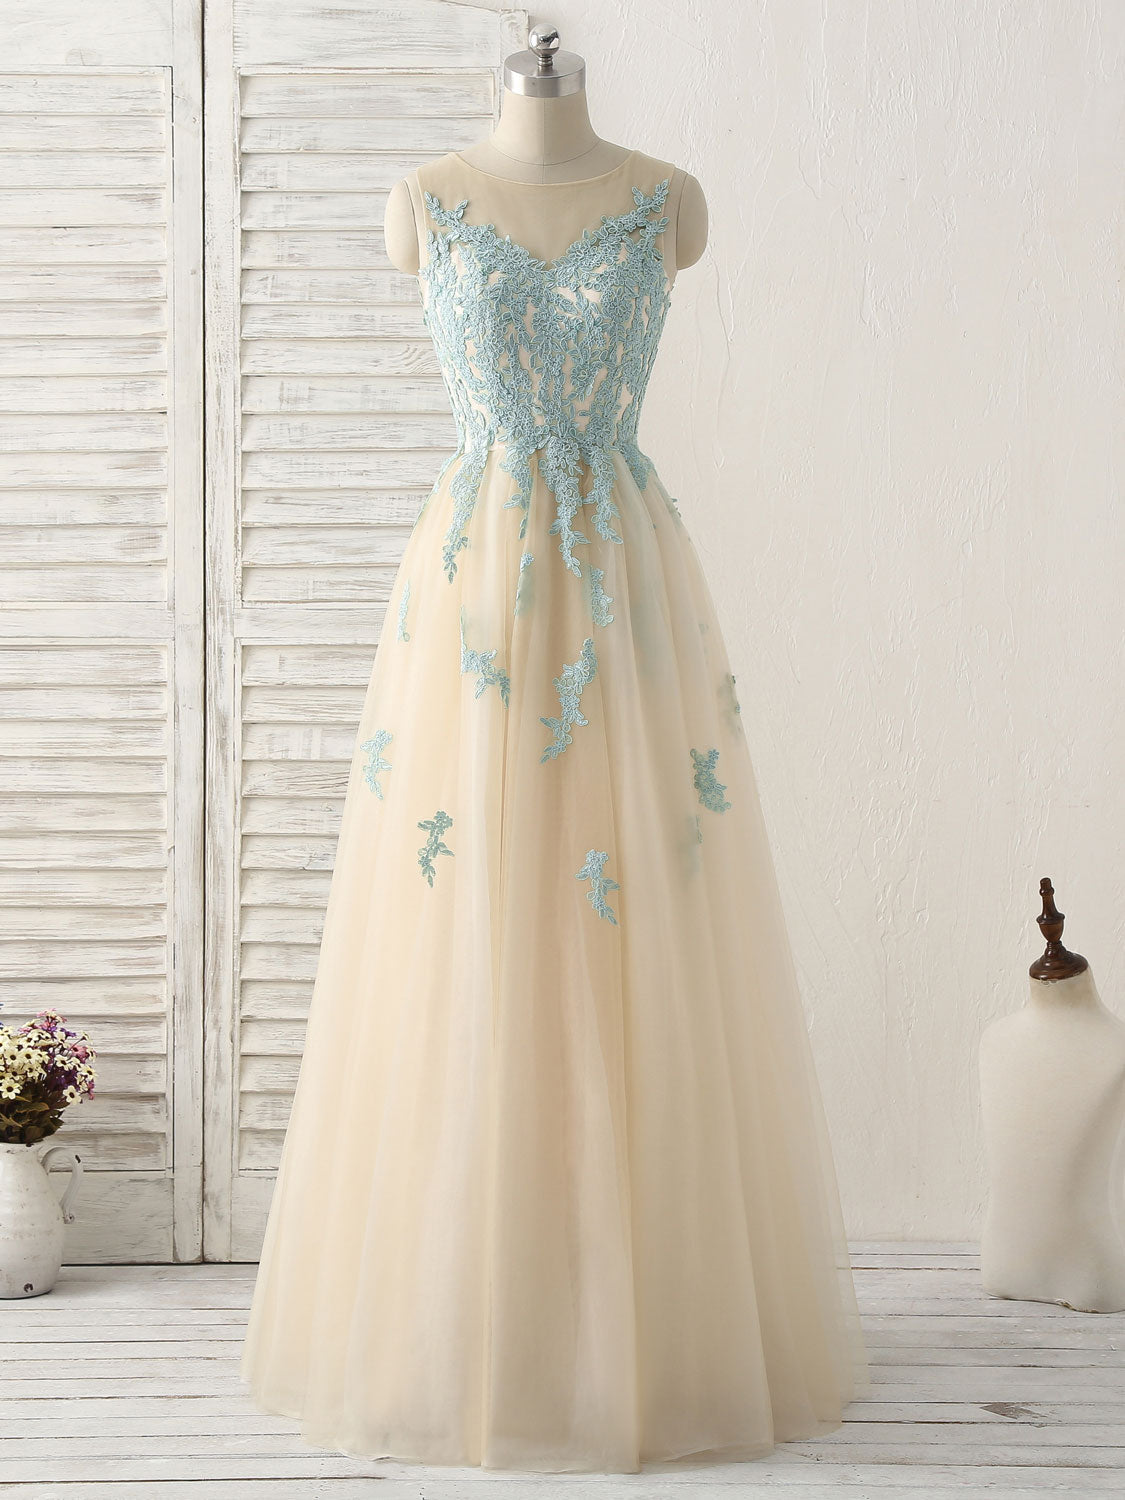 Formal Dresses Cocktail, Cute Champagne Lace Long Prom Dress, A Line Tulle Bridesmaid Dress